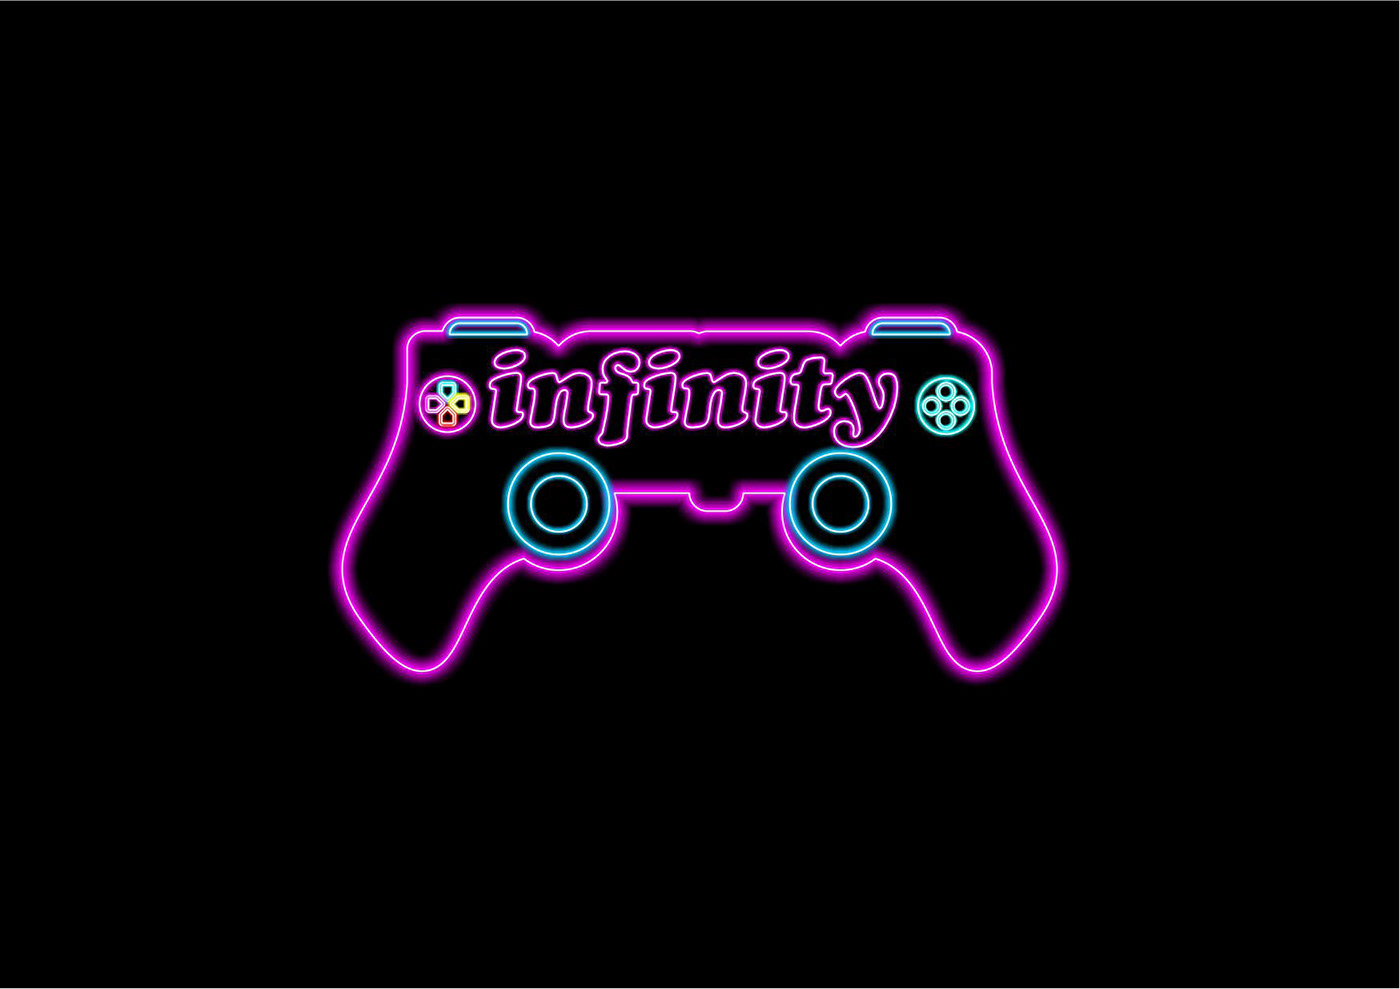 PlayStation 5 (Infnity).  Neon logo for playstation 5 remote control